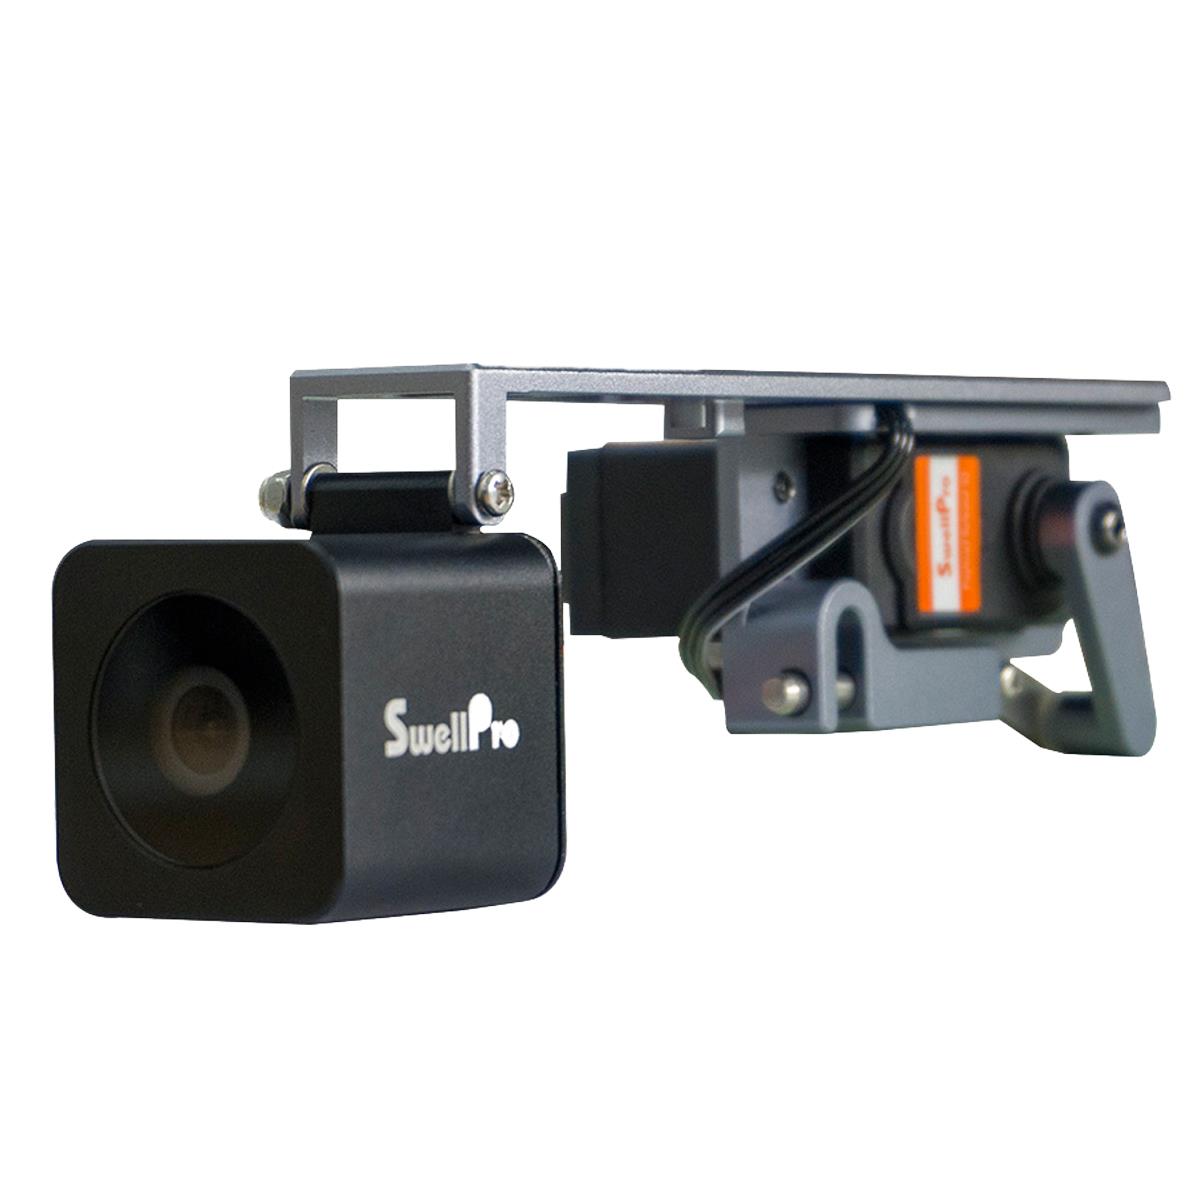 Image of Swellpro PL2-F Payload Release with HD Camera for Fisherman FD1 Fishing Drone